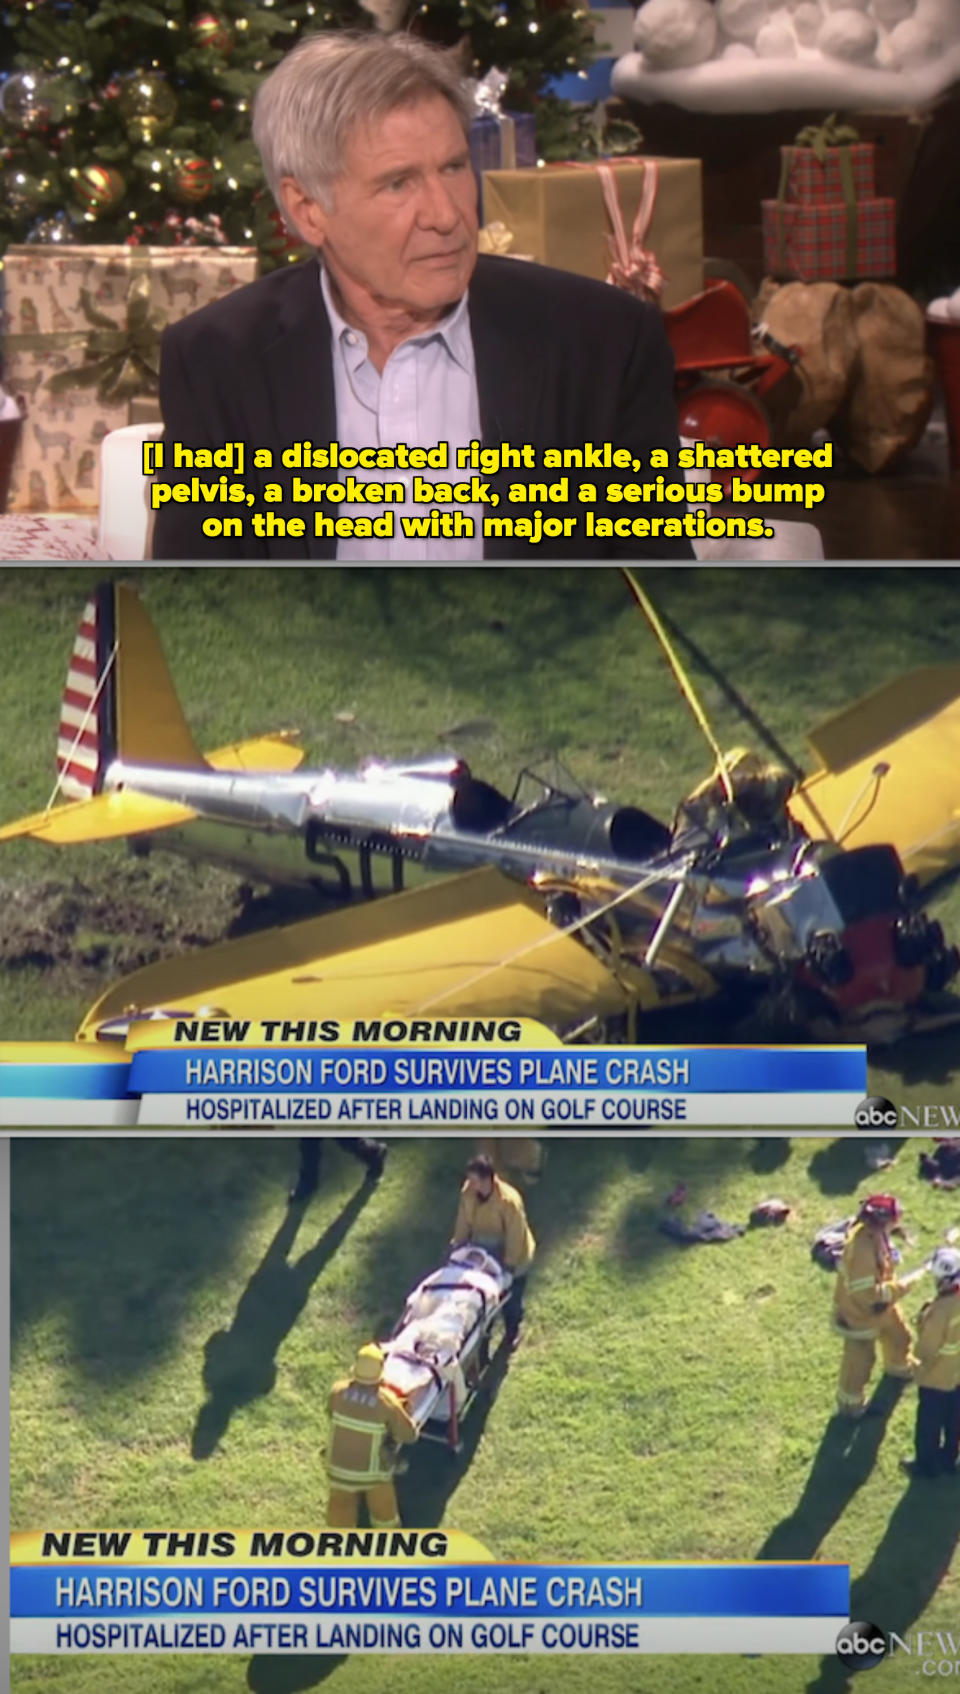 Harrison Ford being interviewed by Ellen DeGeneres, plus screenshots from news coverage of his crash and being carried away on a stretcher